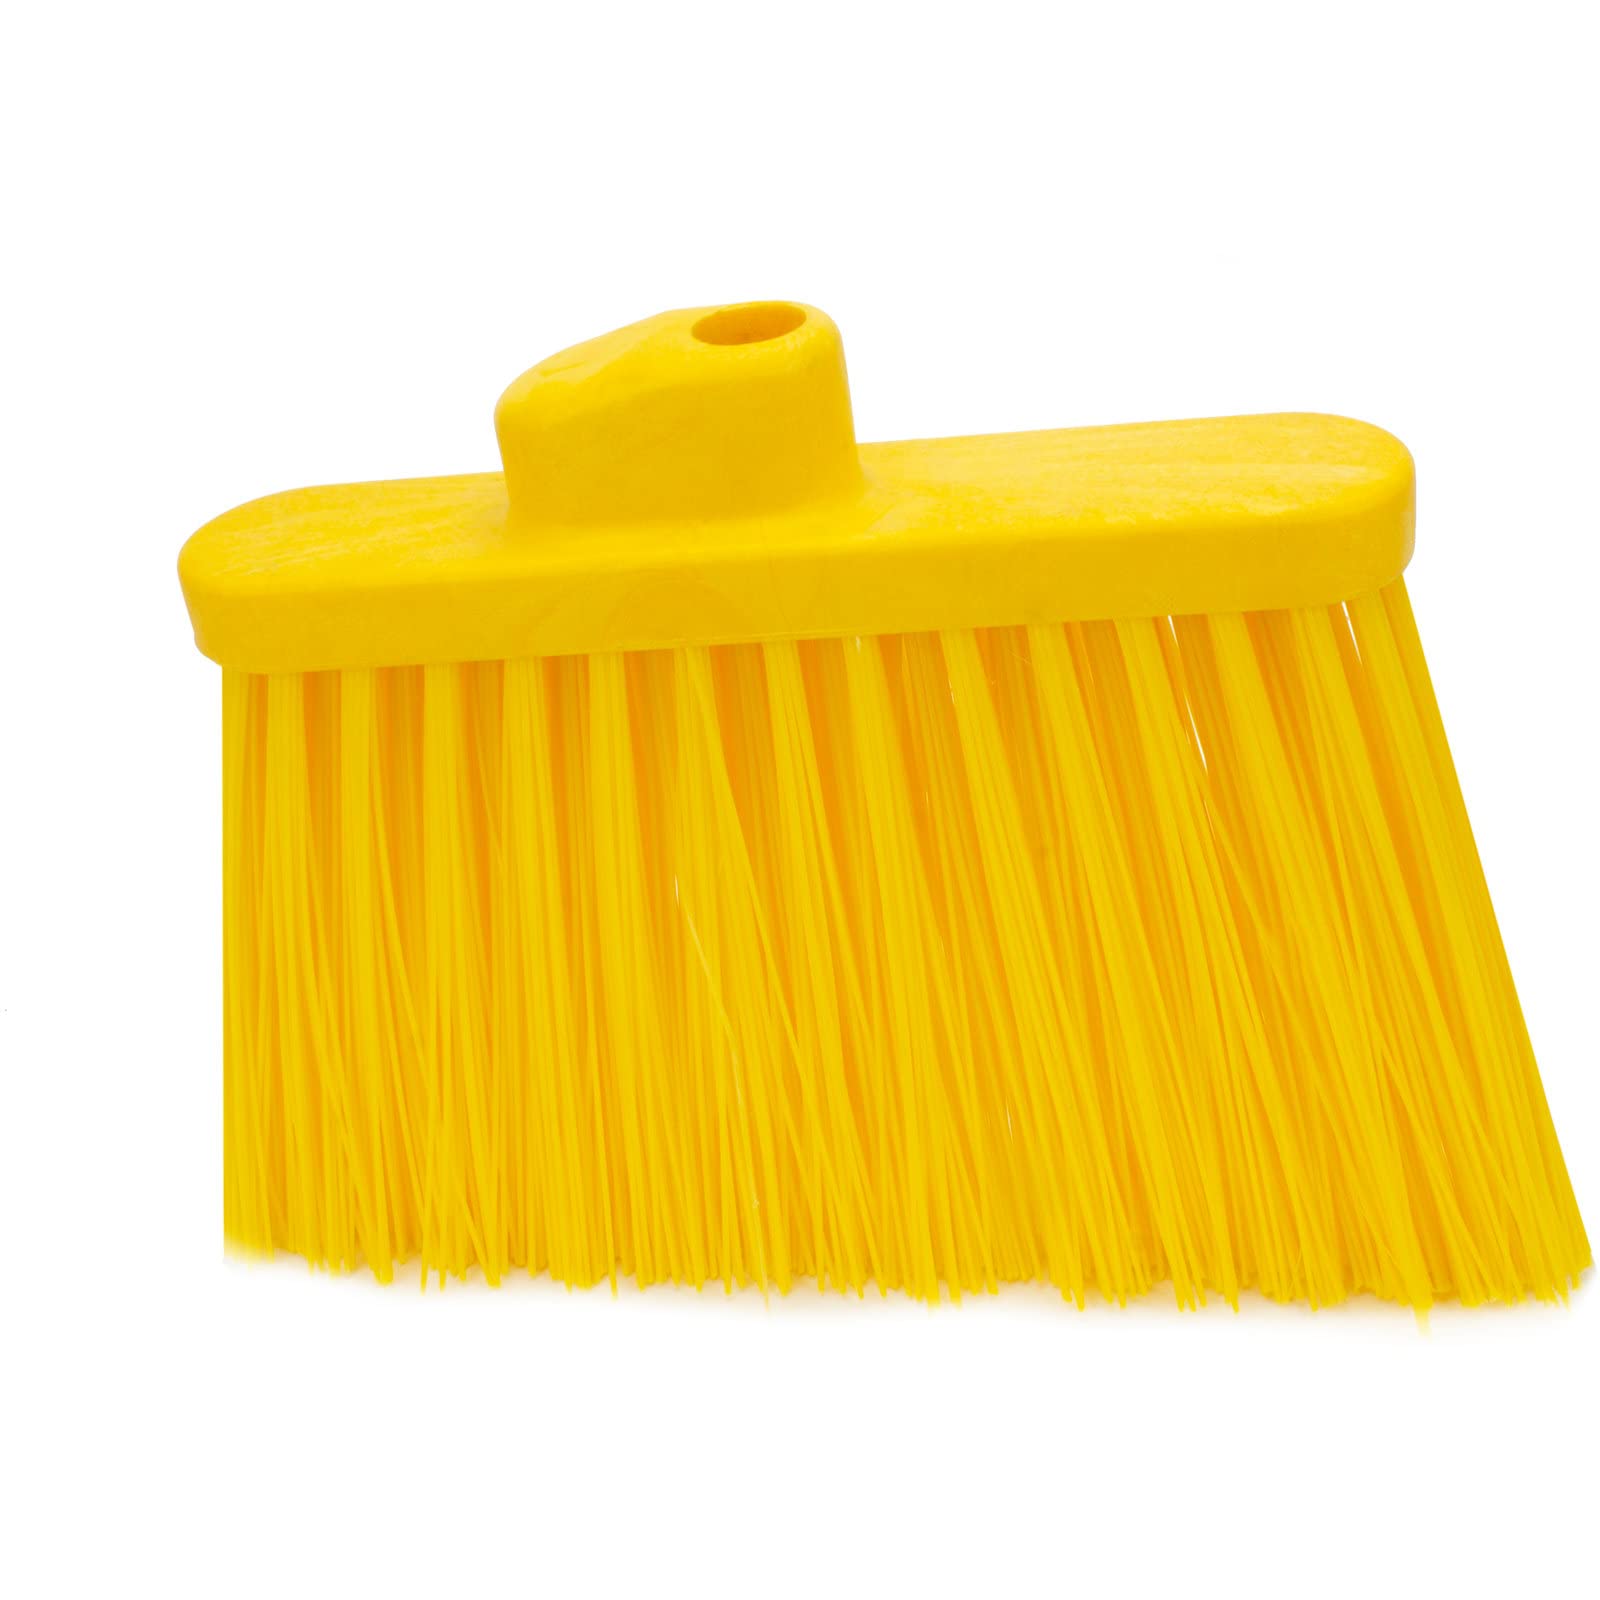 SPARTA Plastic Broom Head, Angled, Un-Flagged for Large Debris Indoor, Outdoor, Home, Restaurant, Lobby, Office, 12 Inches, Yellow, (Pack of 12)